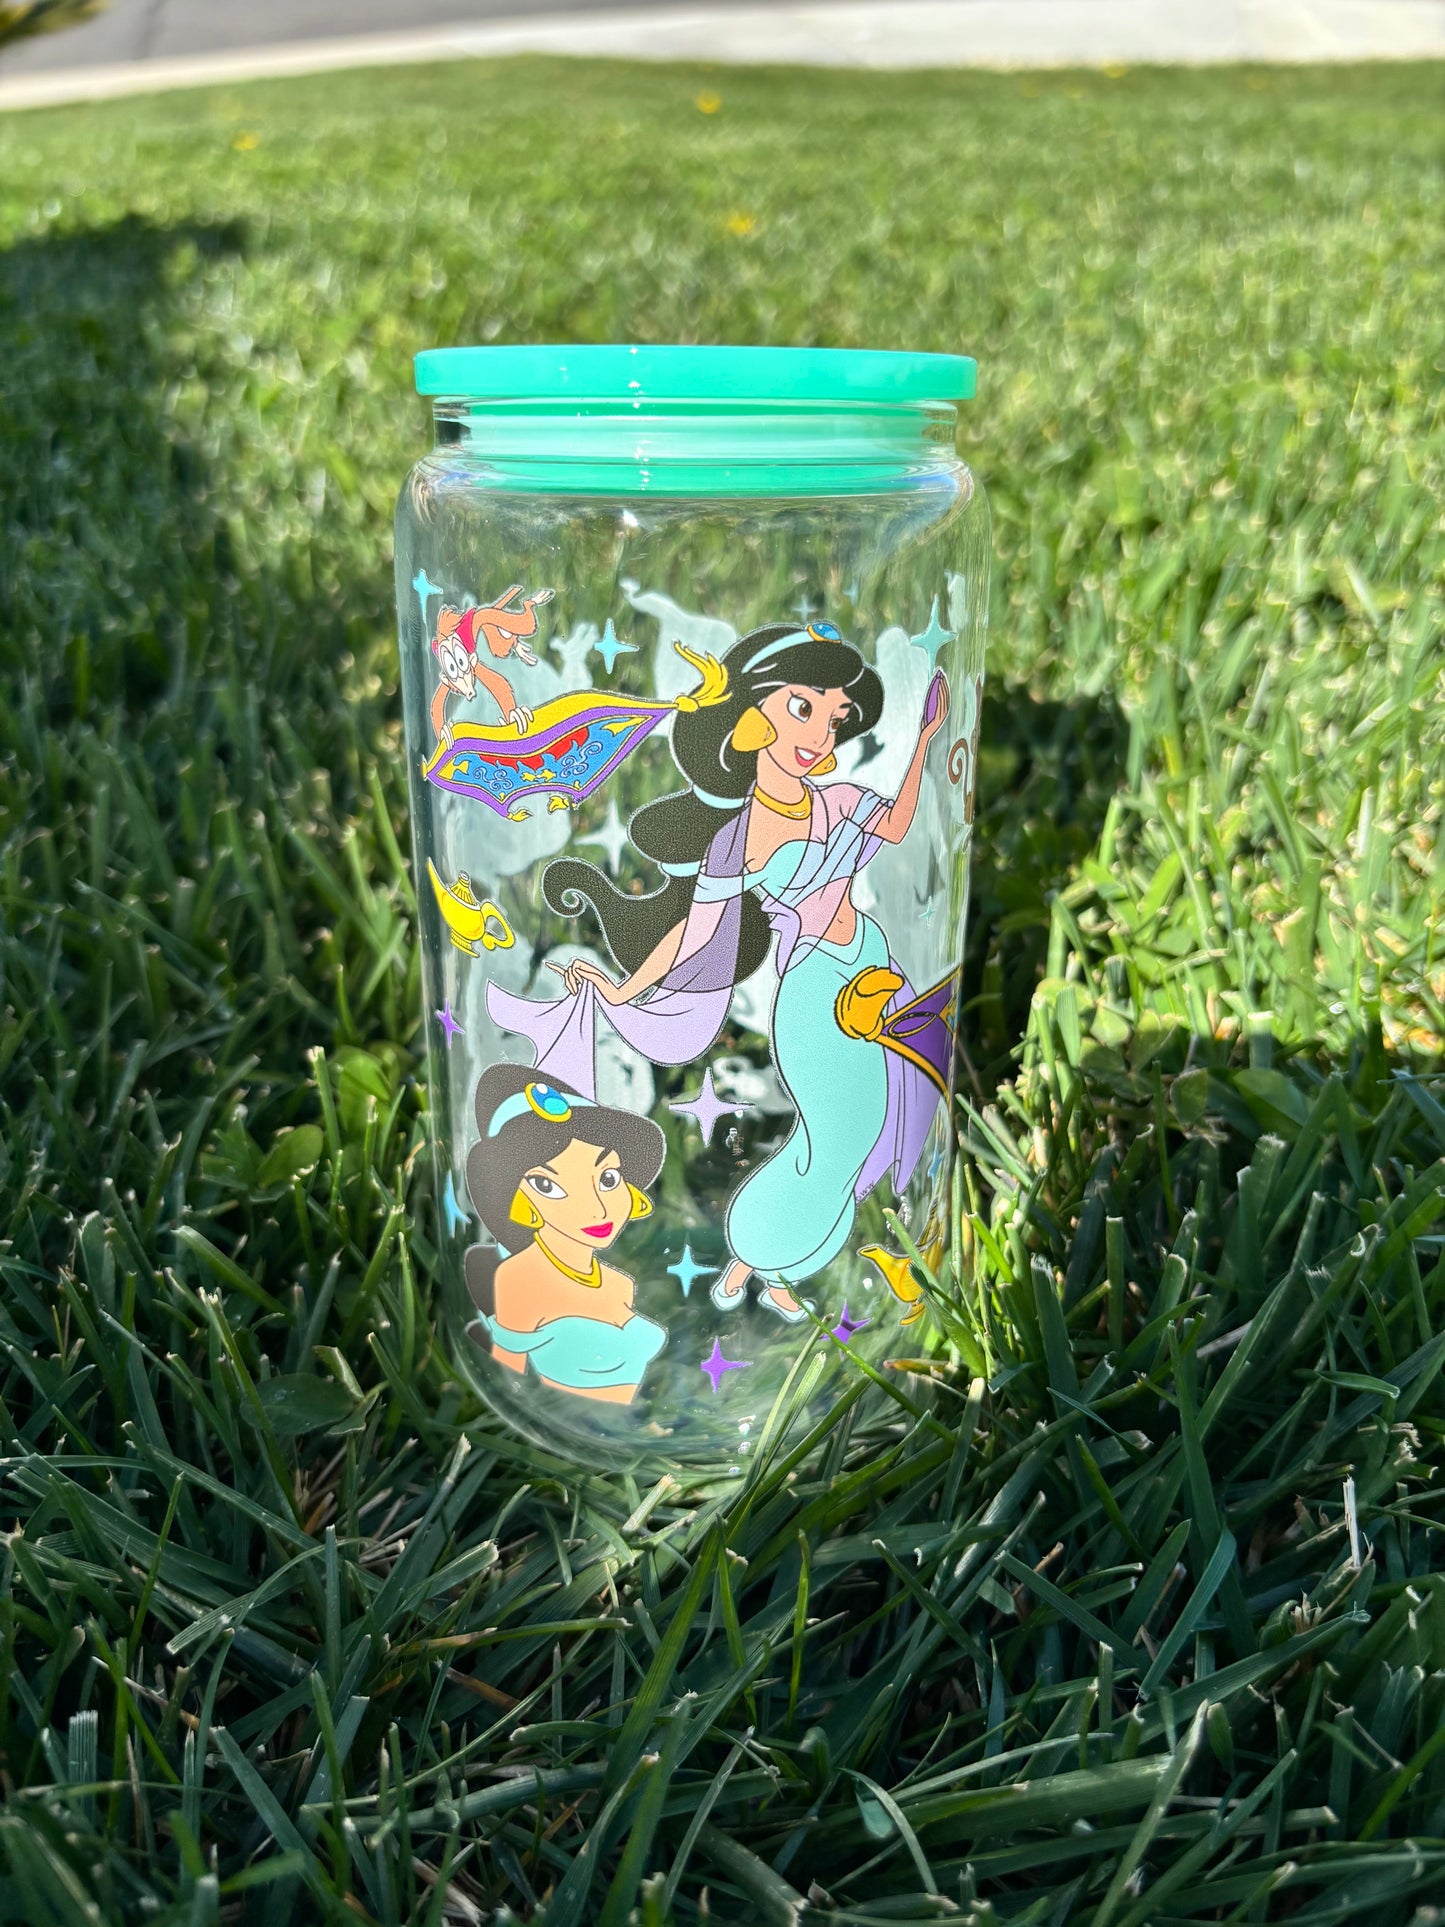 Aladdin 16oz glass cup w/colored lid and straw